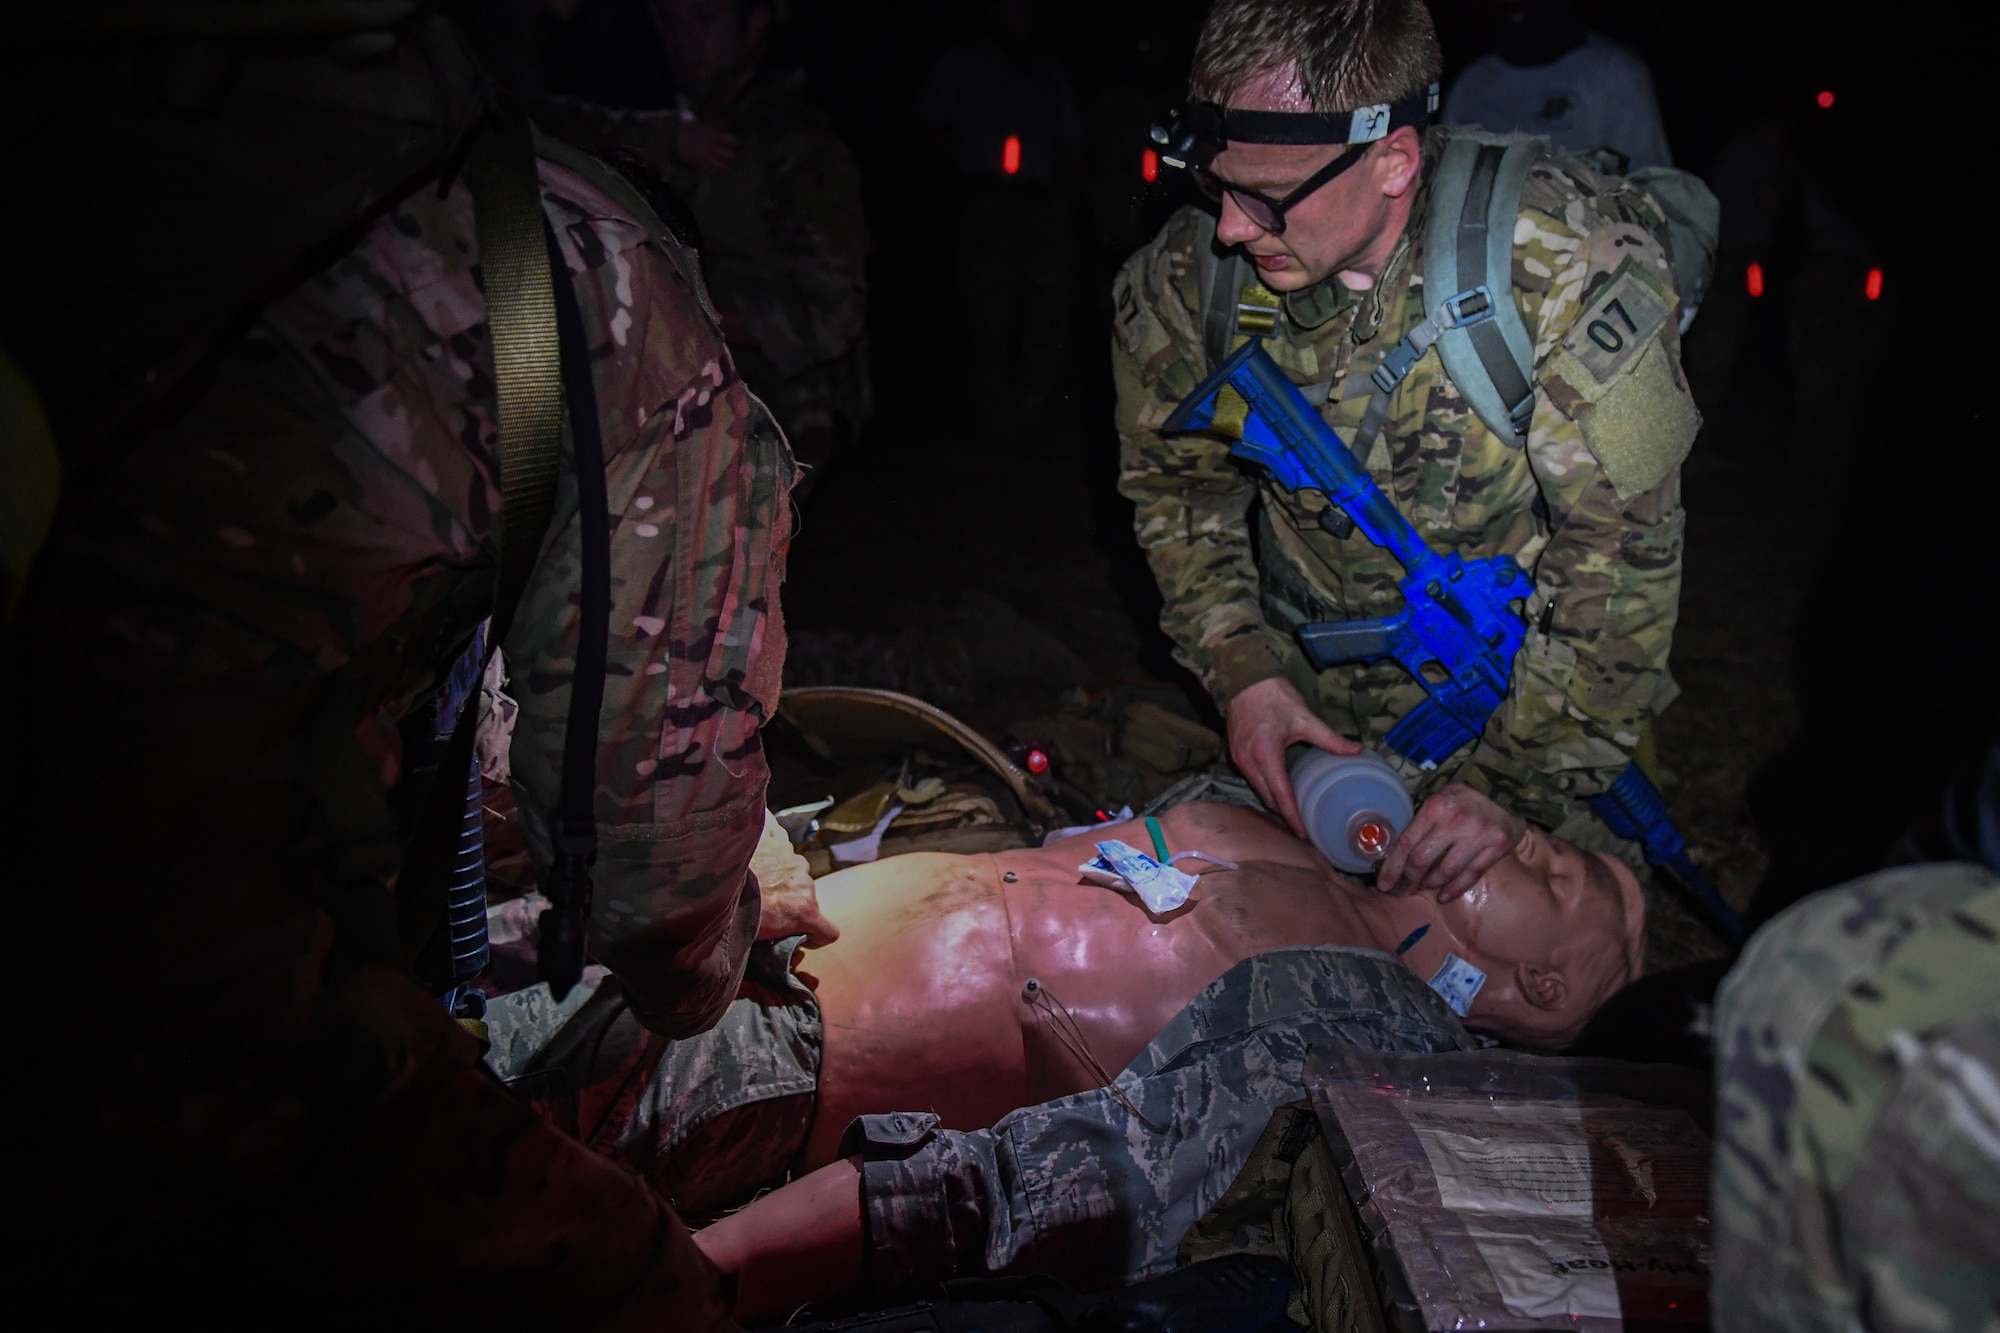 Special Operations Surgical Team candidates participate in a medical scenario operating on a subject in low light